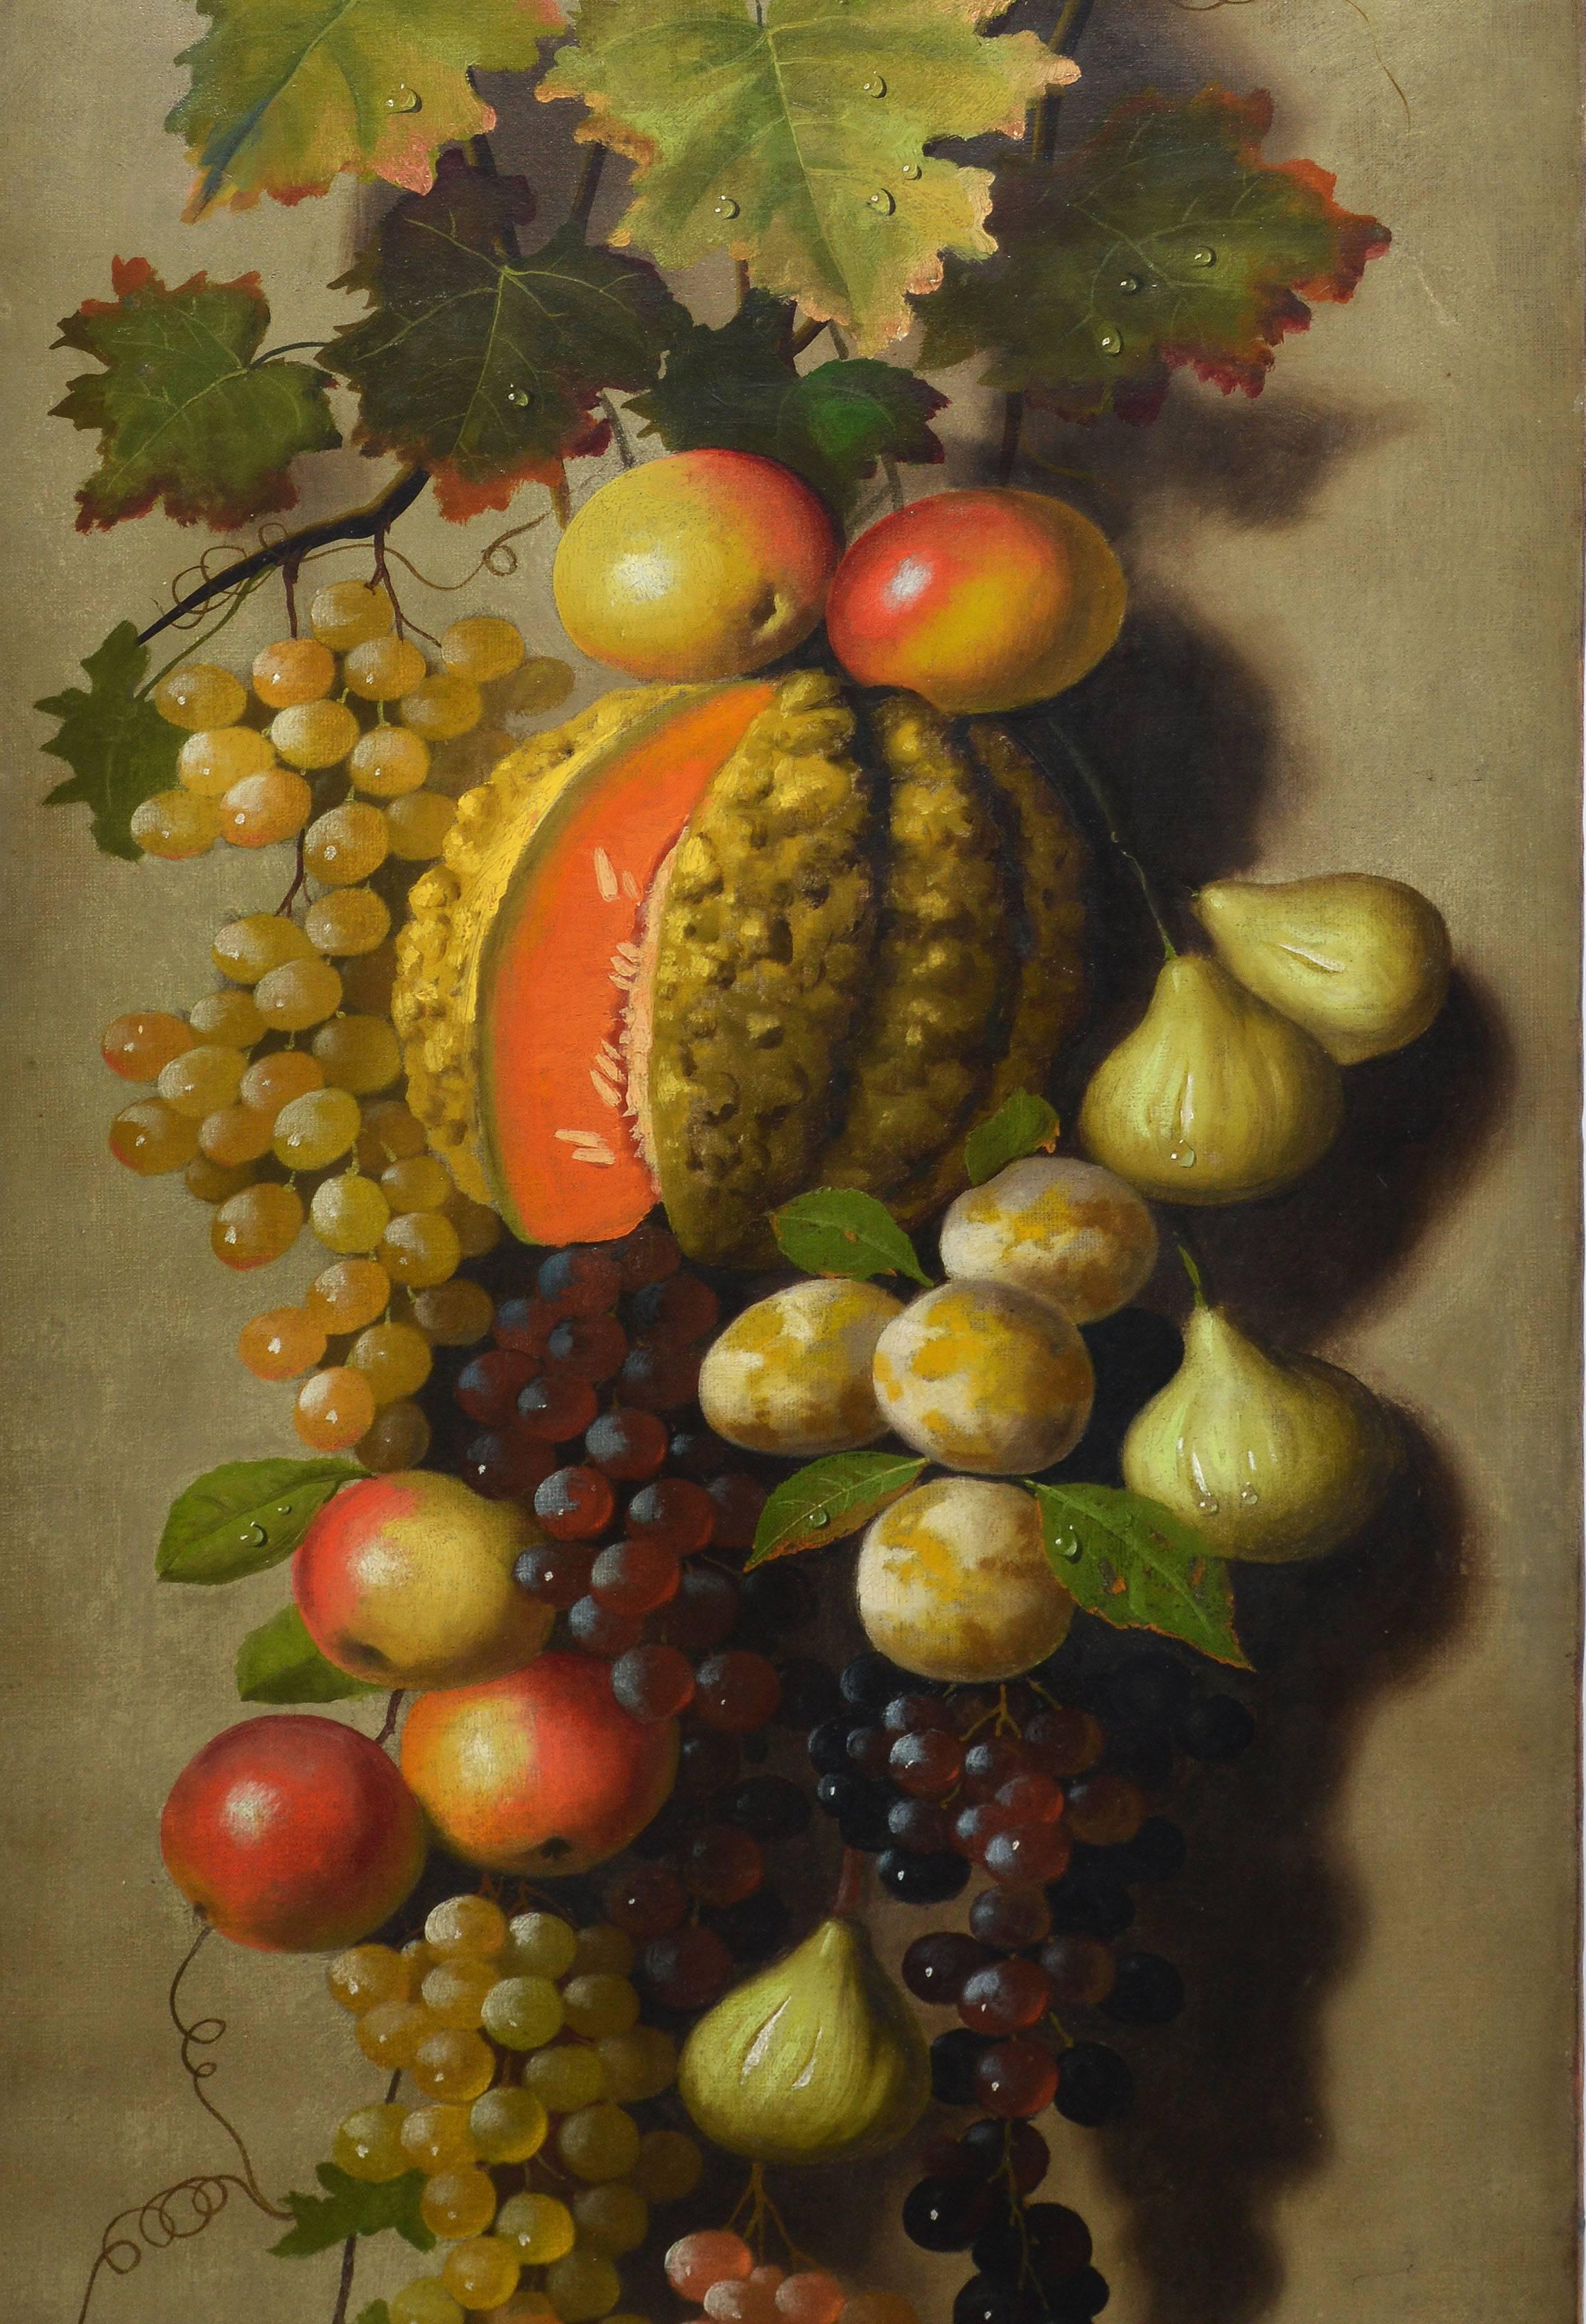 Realist fruit still life oil painting by Michelangelo Meucci  (1840 - 1890).  Oil on canvas, circa 1880.  Signed lower left, 